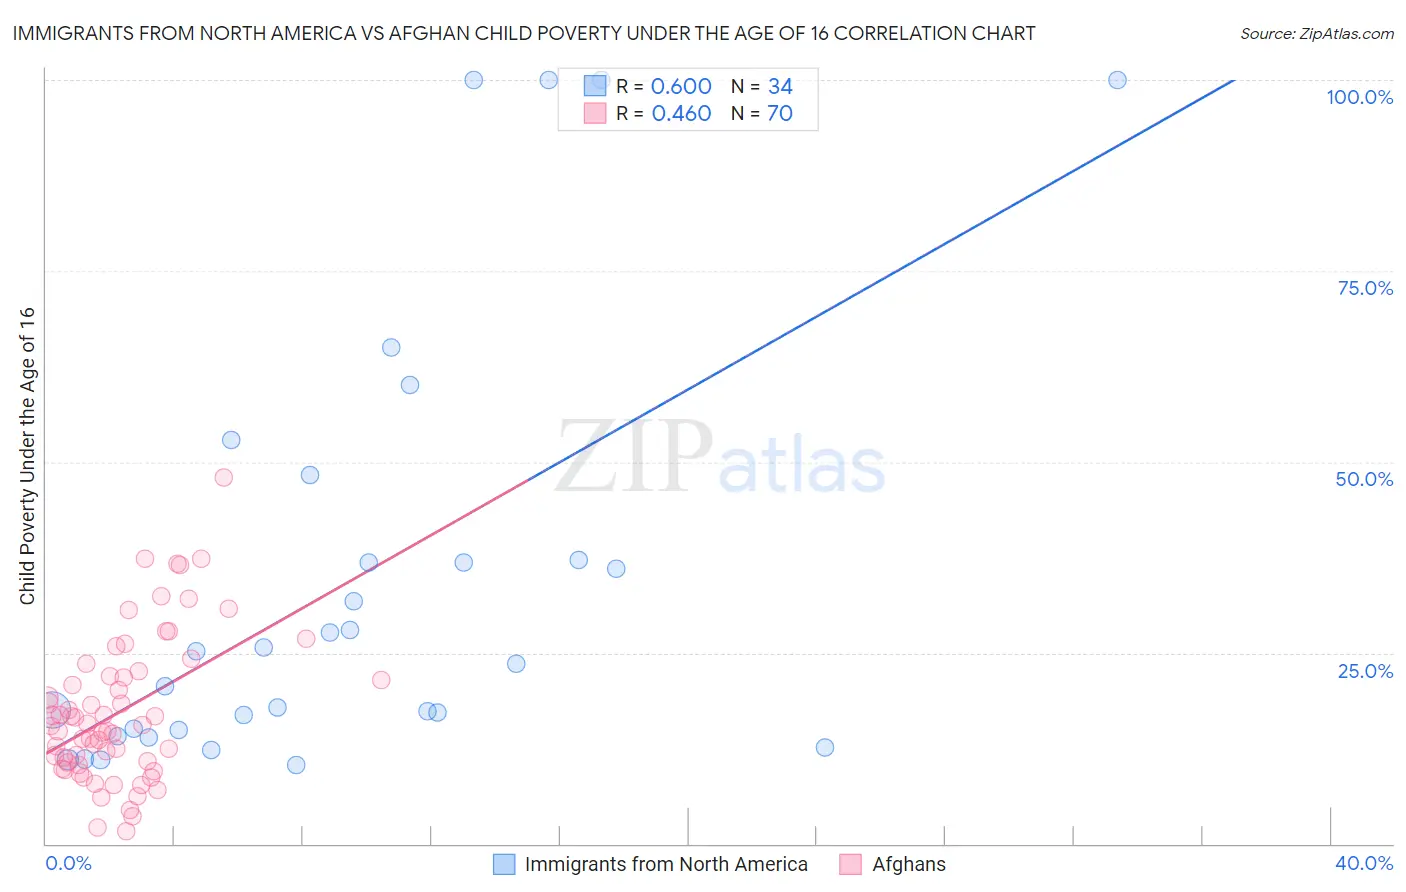 Immigrants from North America vs Afghan Child Poverty Under the Age of 16